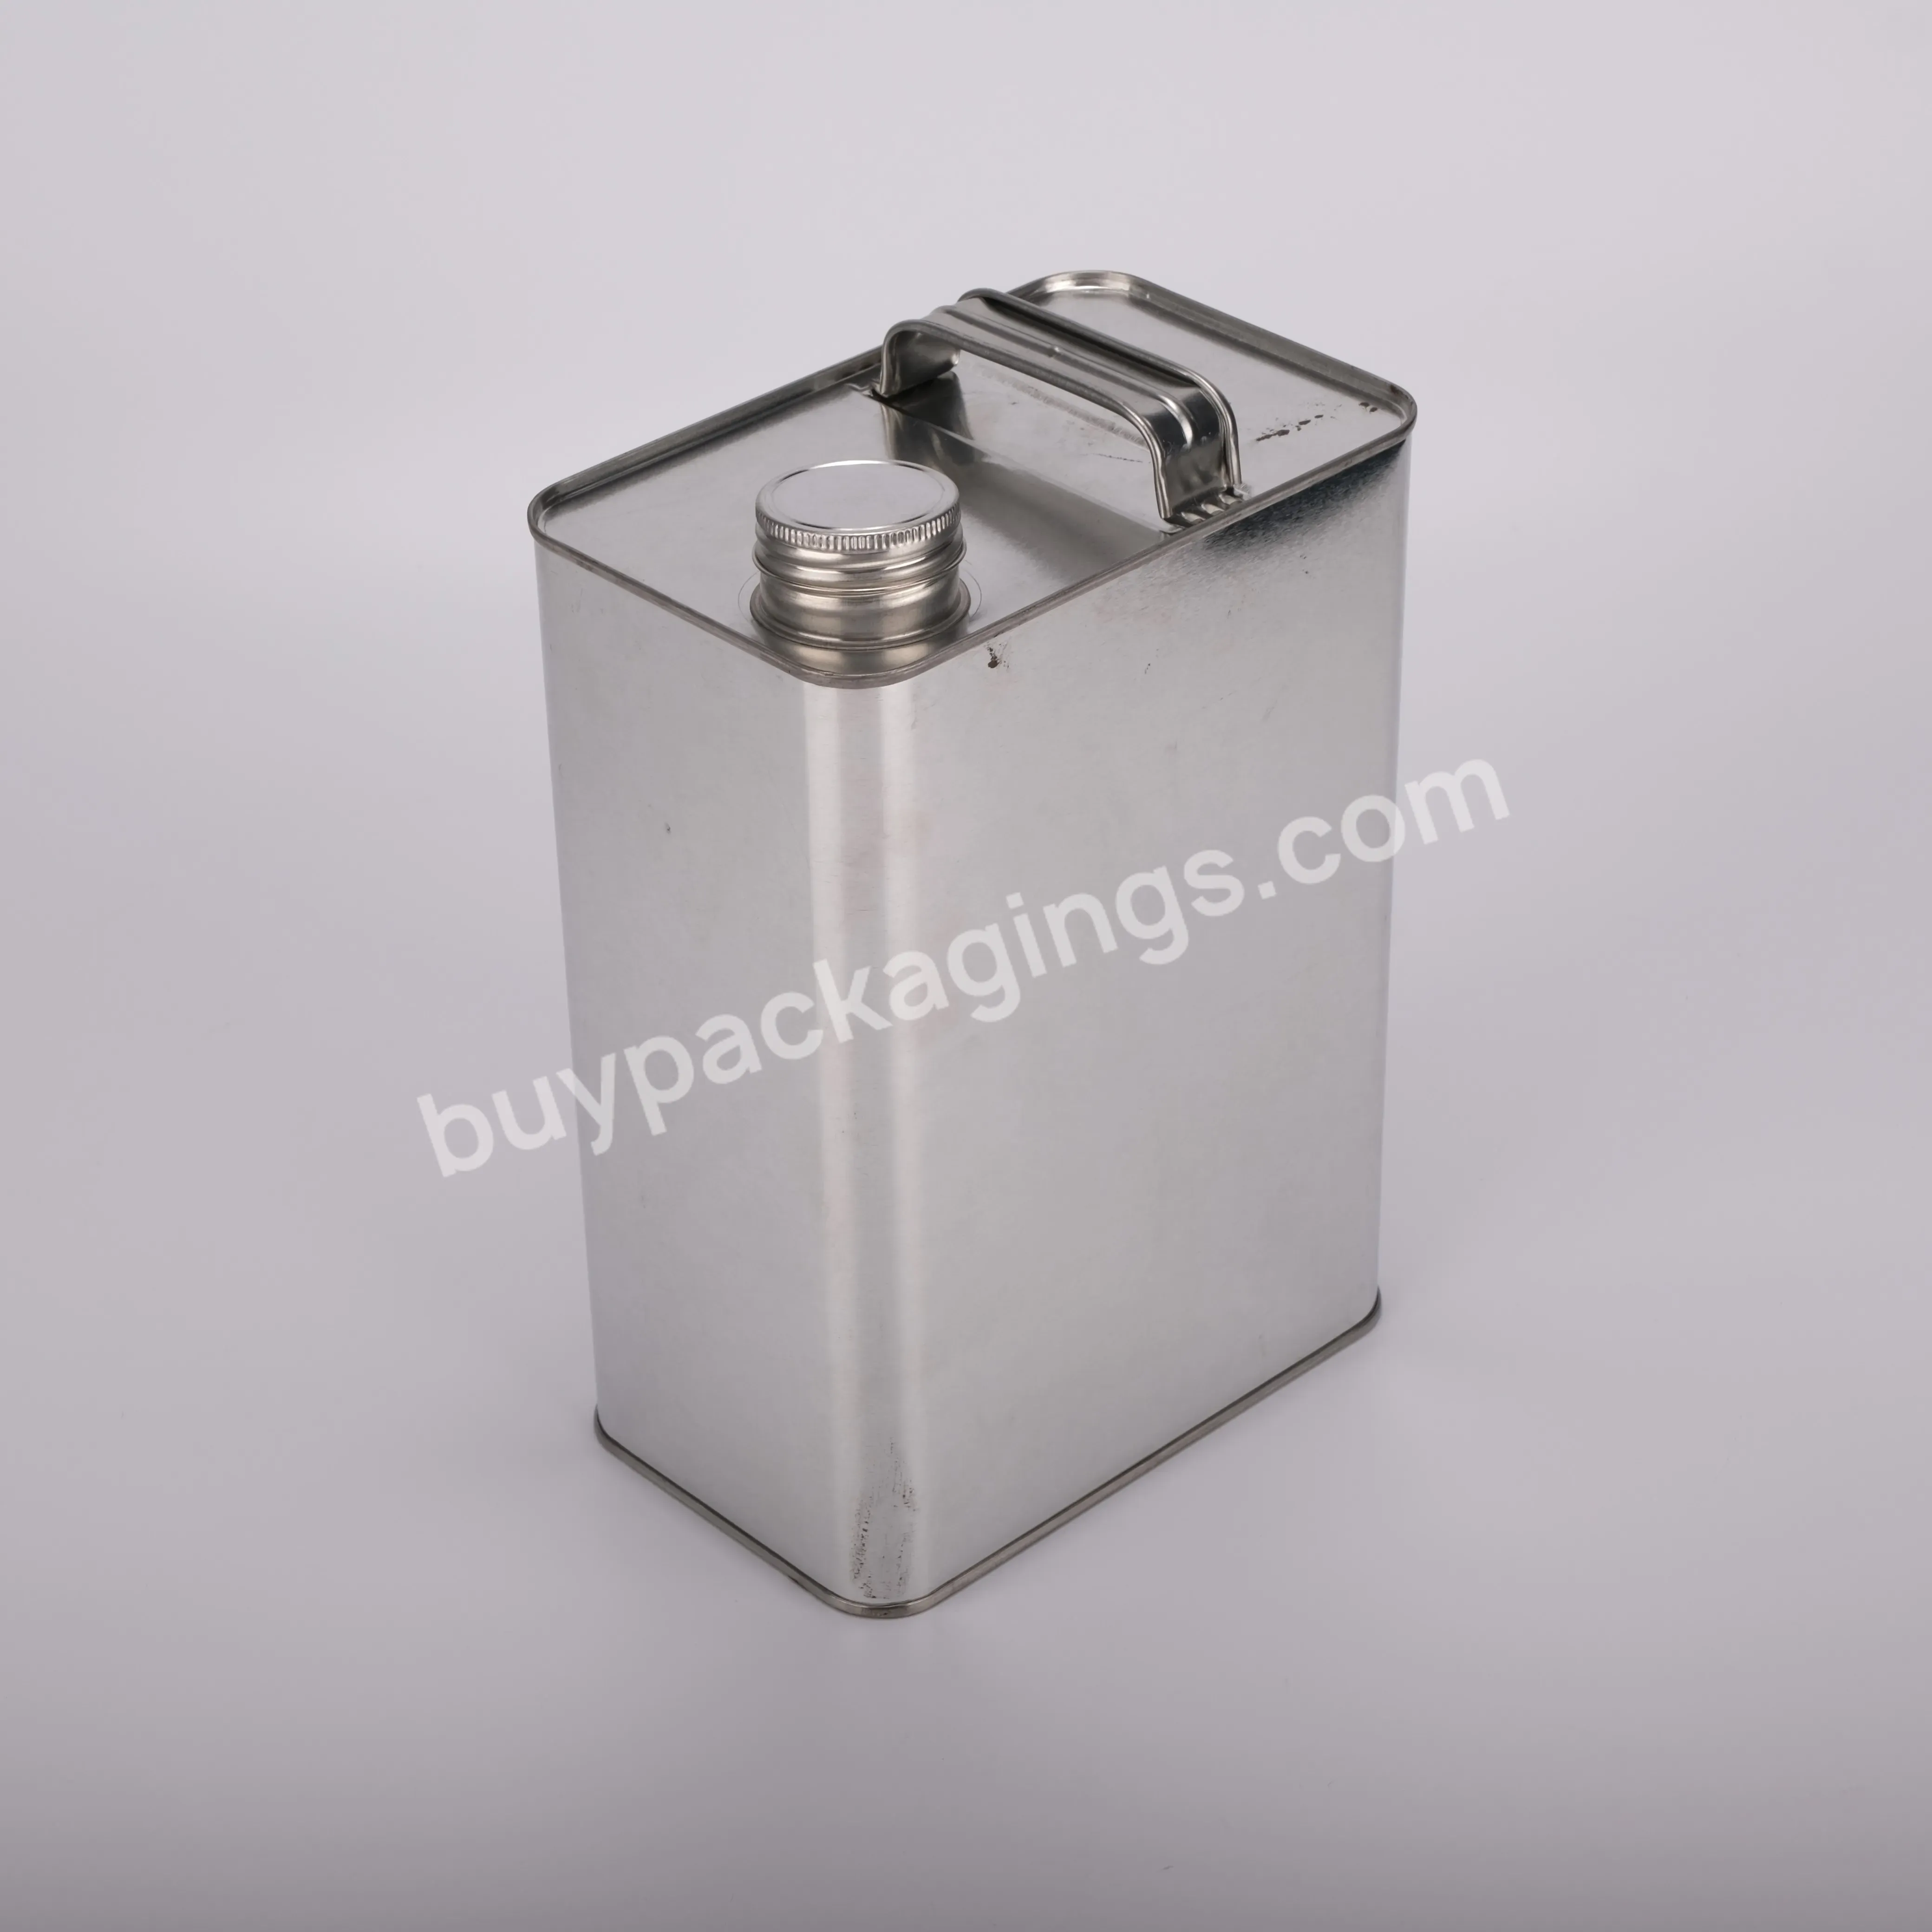 New Hot Sale 1gallon Printed F-style Square Metal Tin Can With Metal Handle And Screw Top For Motor Oil - Buy 1 Gallon Square Tin Can,Tin Can With Screw Top For Motor Oil,Square Metal Tin Can.